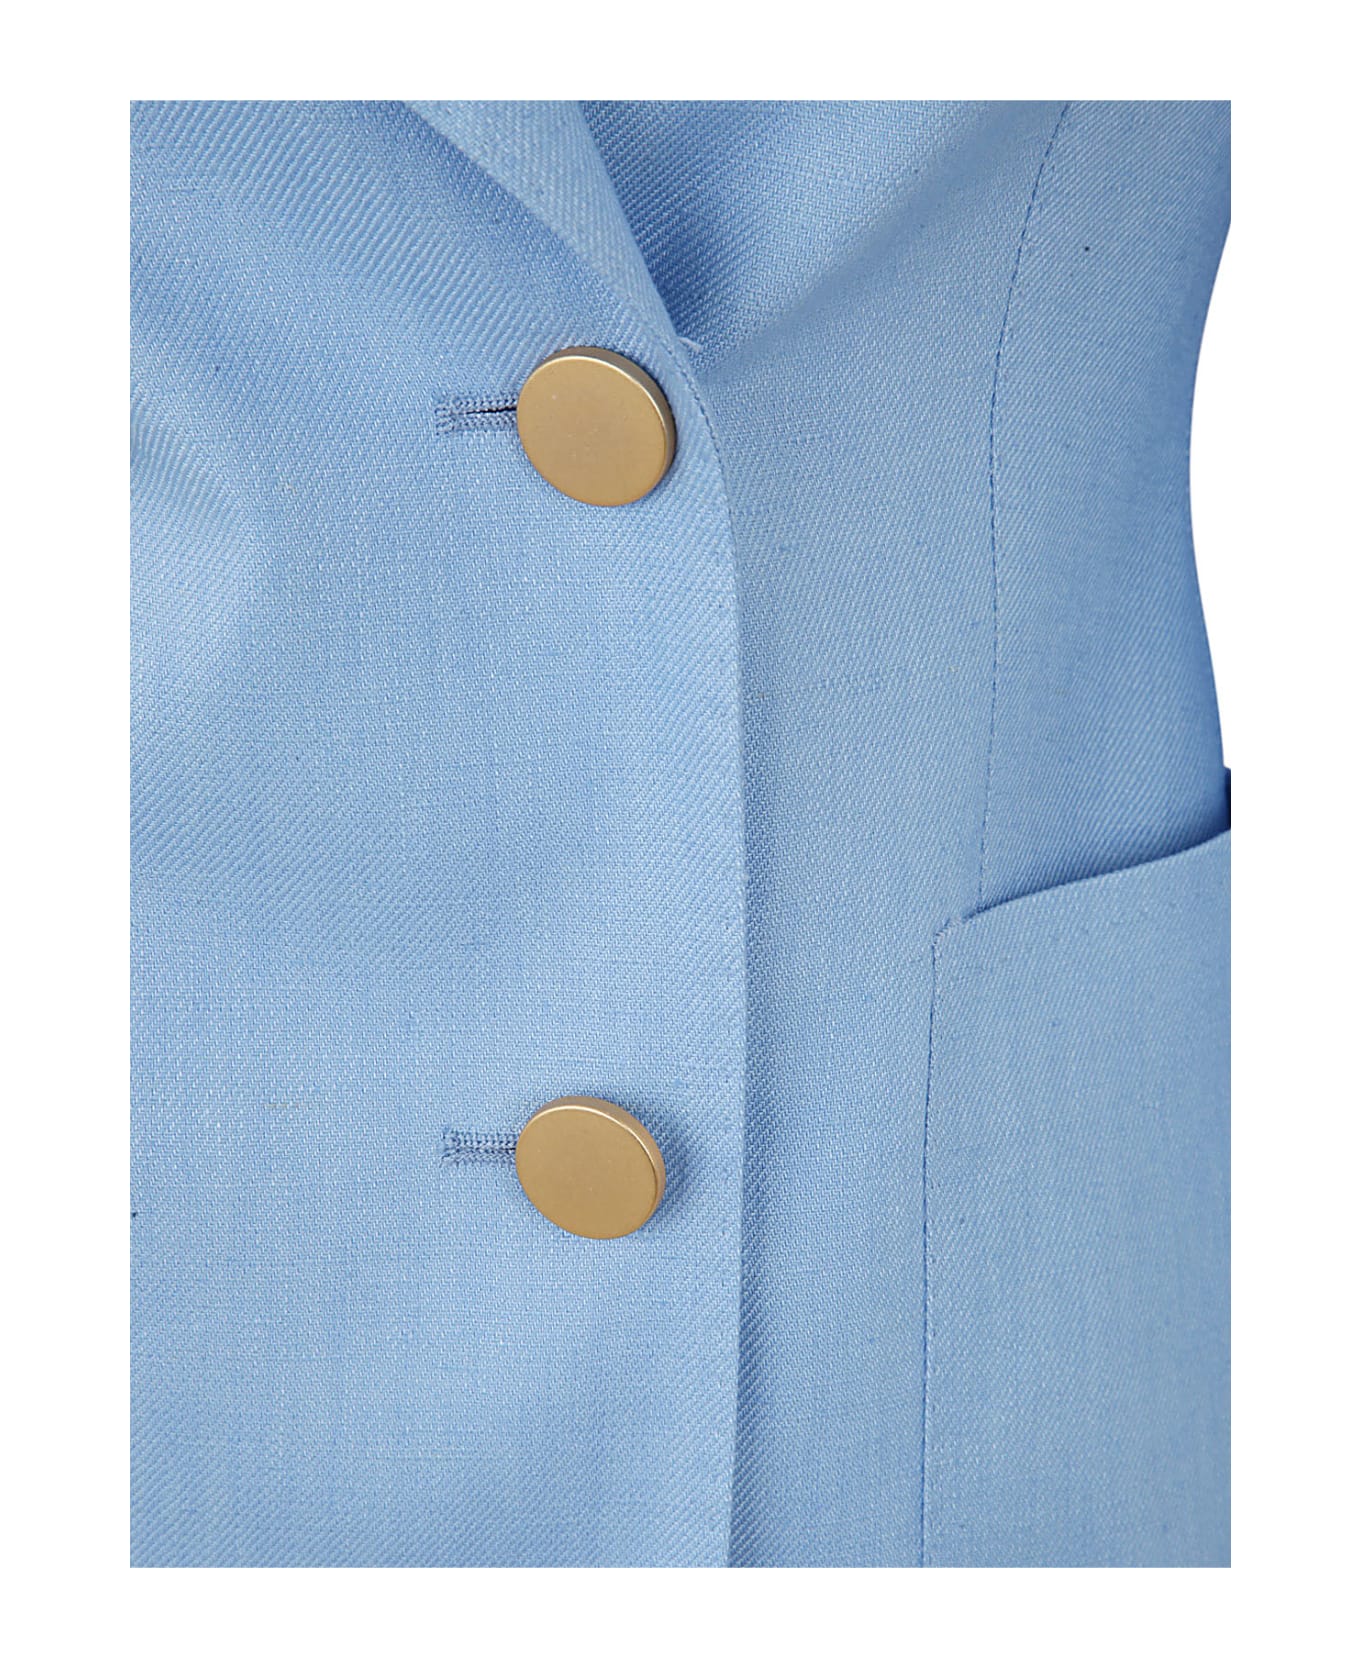 Tagliatore Four Buttons Double Breasted Blazer - Light Blue ブレザー